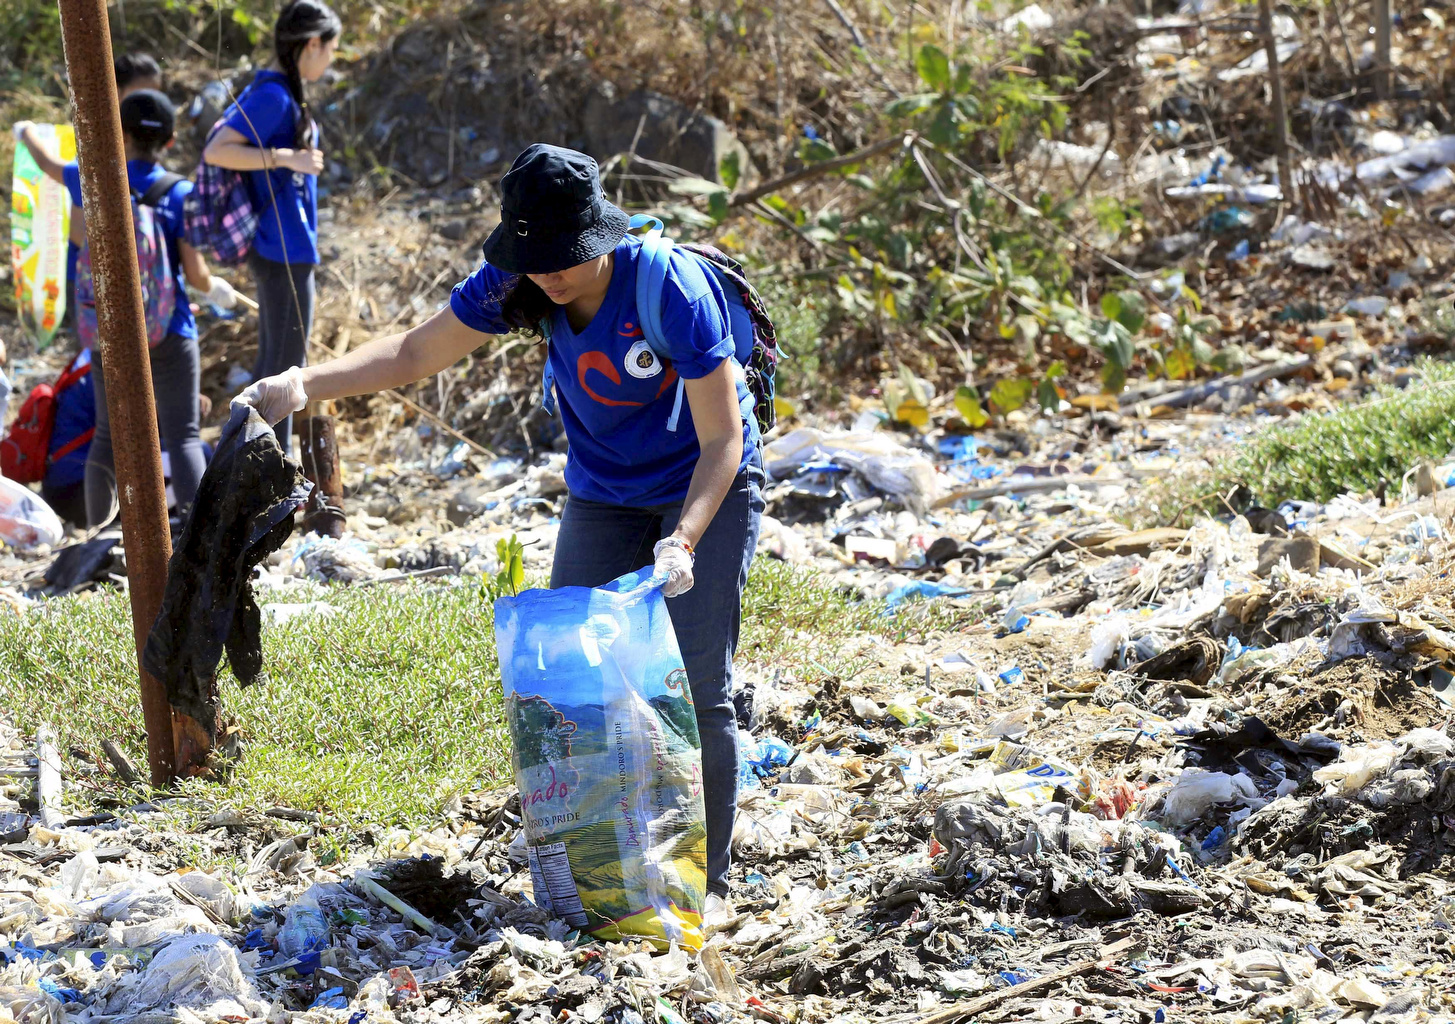 A volunteer picks up trash at Freedom Island, a marshland considered to be a sanctuary for birds, fish and mangroves in April in the Philippines. (CNS/Reuters/Romeo Ranoco)